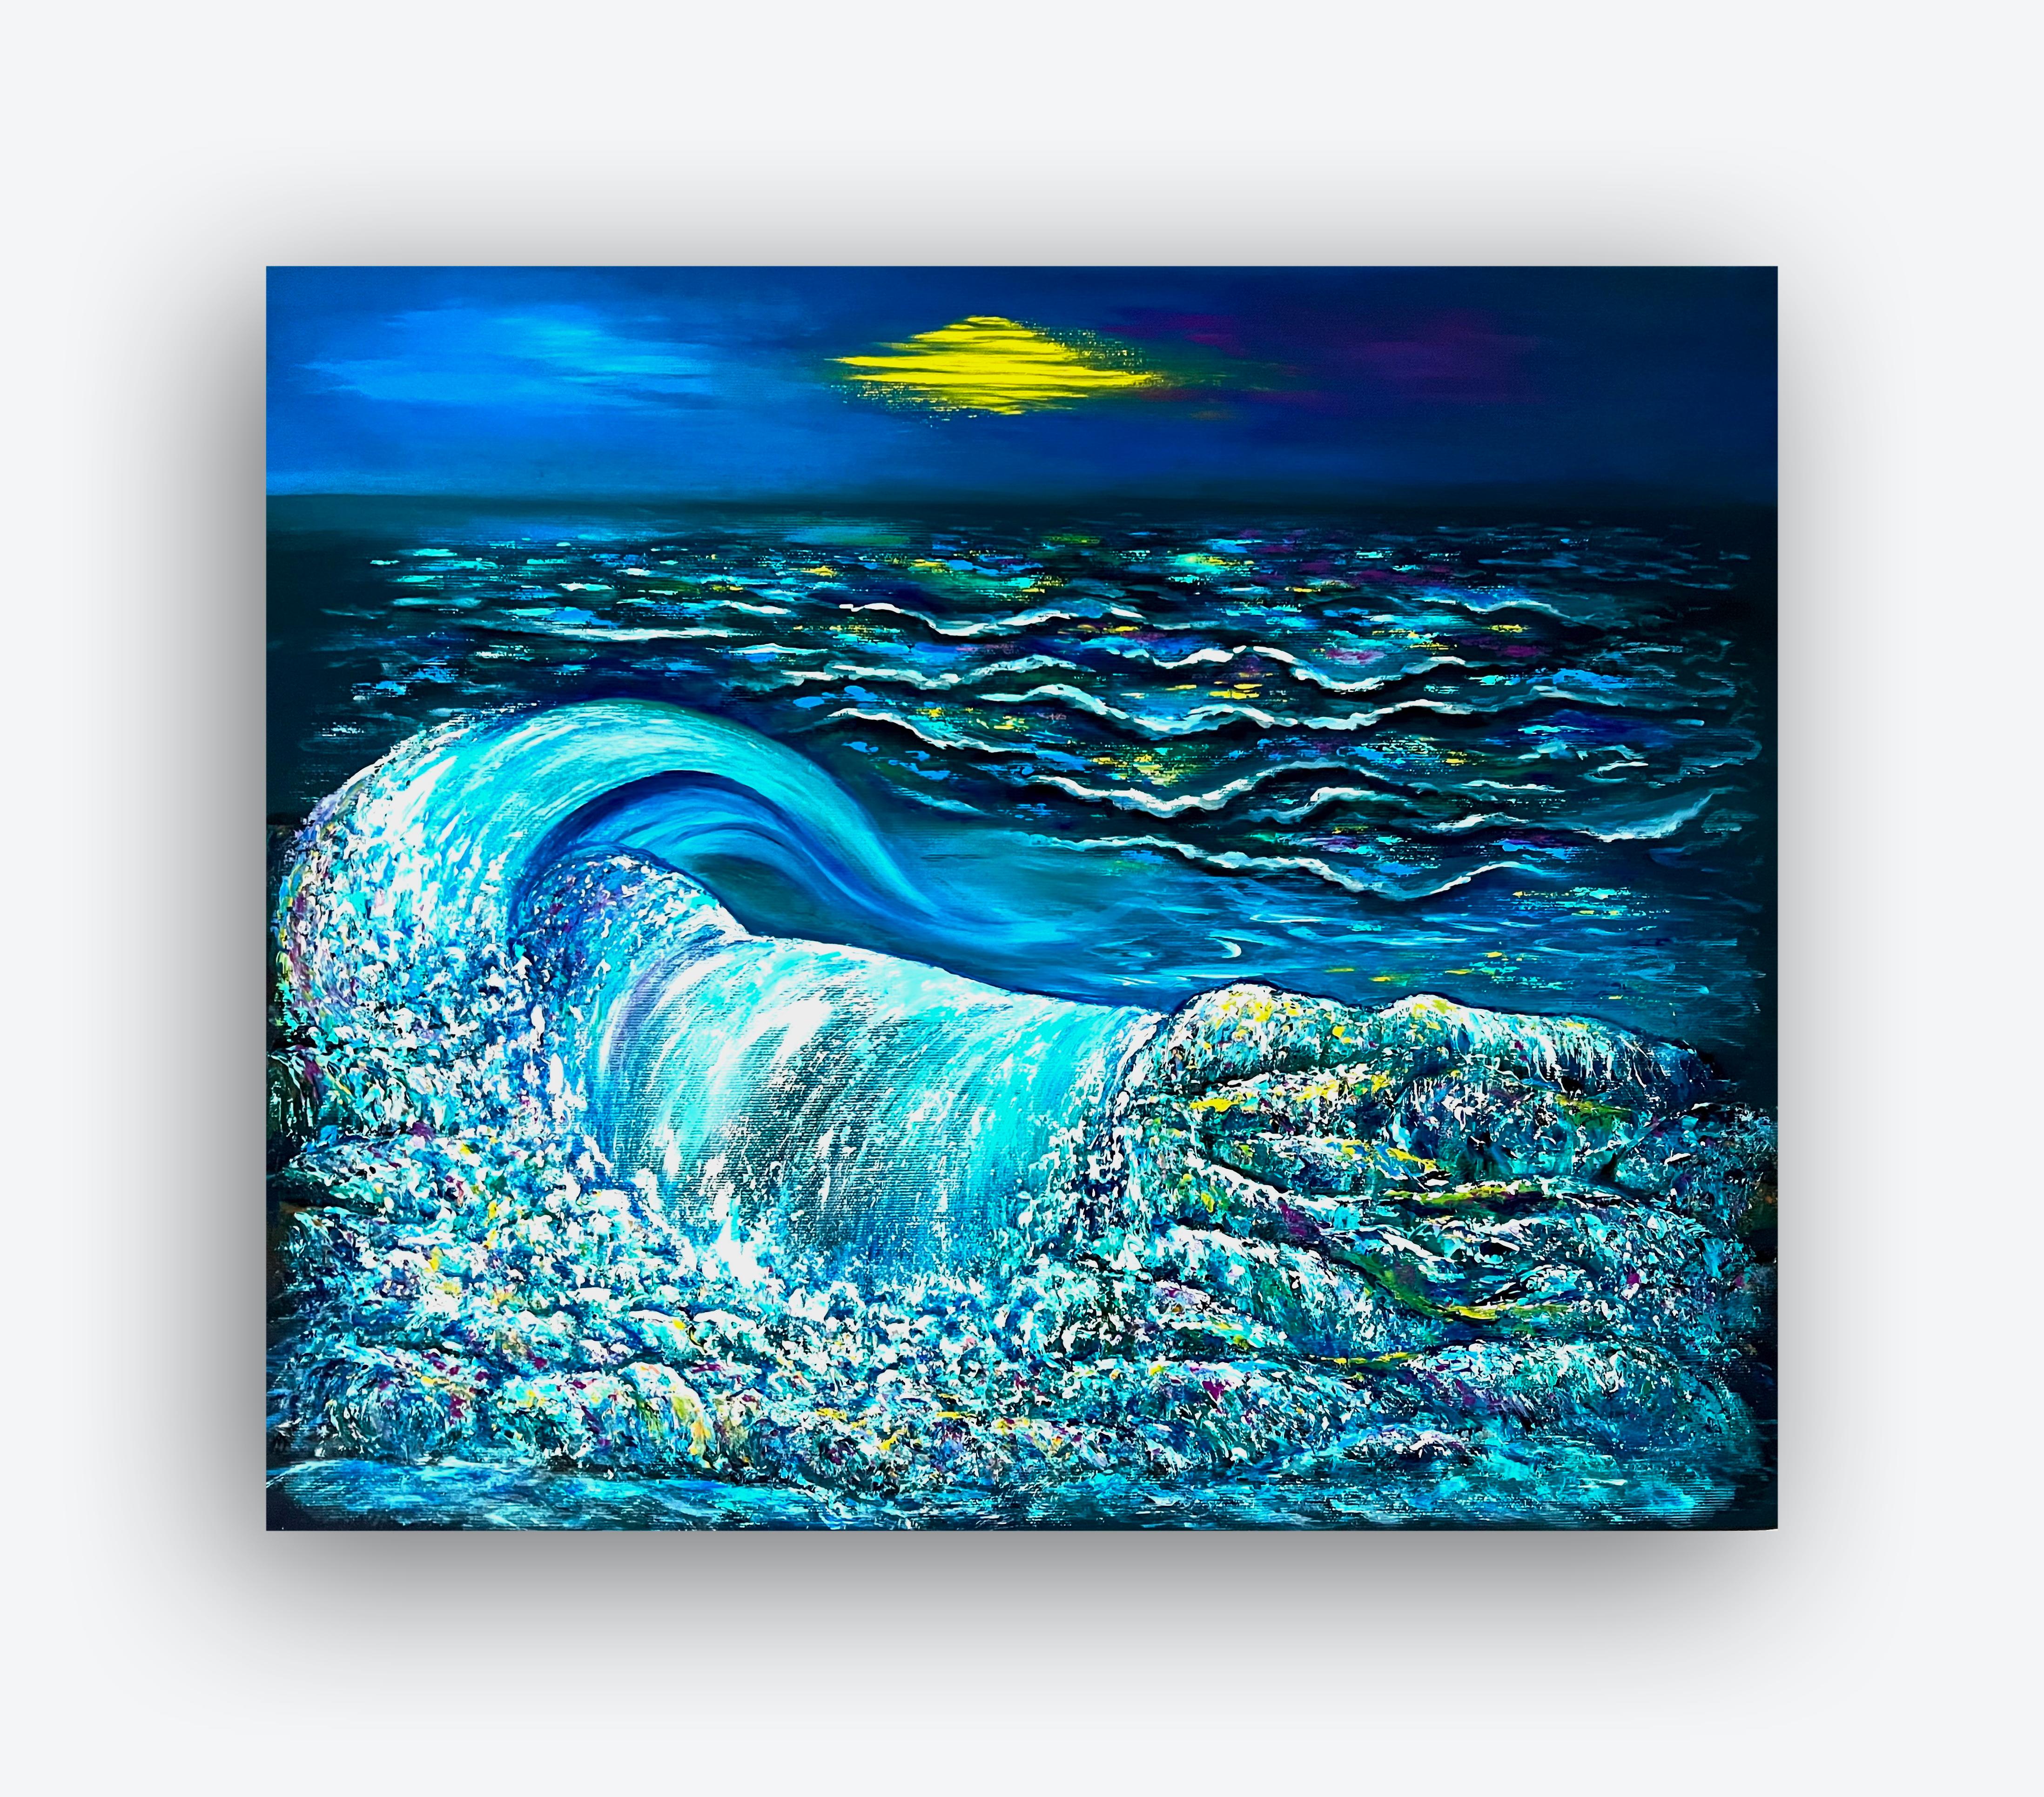  Peaceful Evening. Oil painting, Impressionist style. Sea / Waves / Water/ Moon. 7